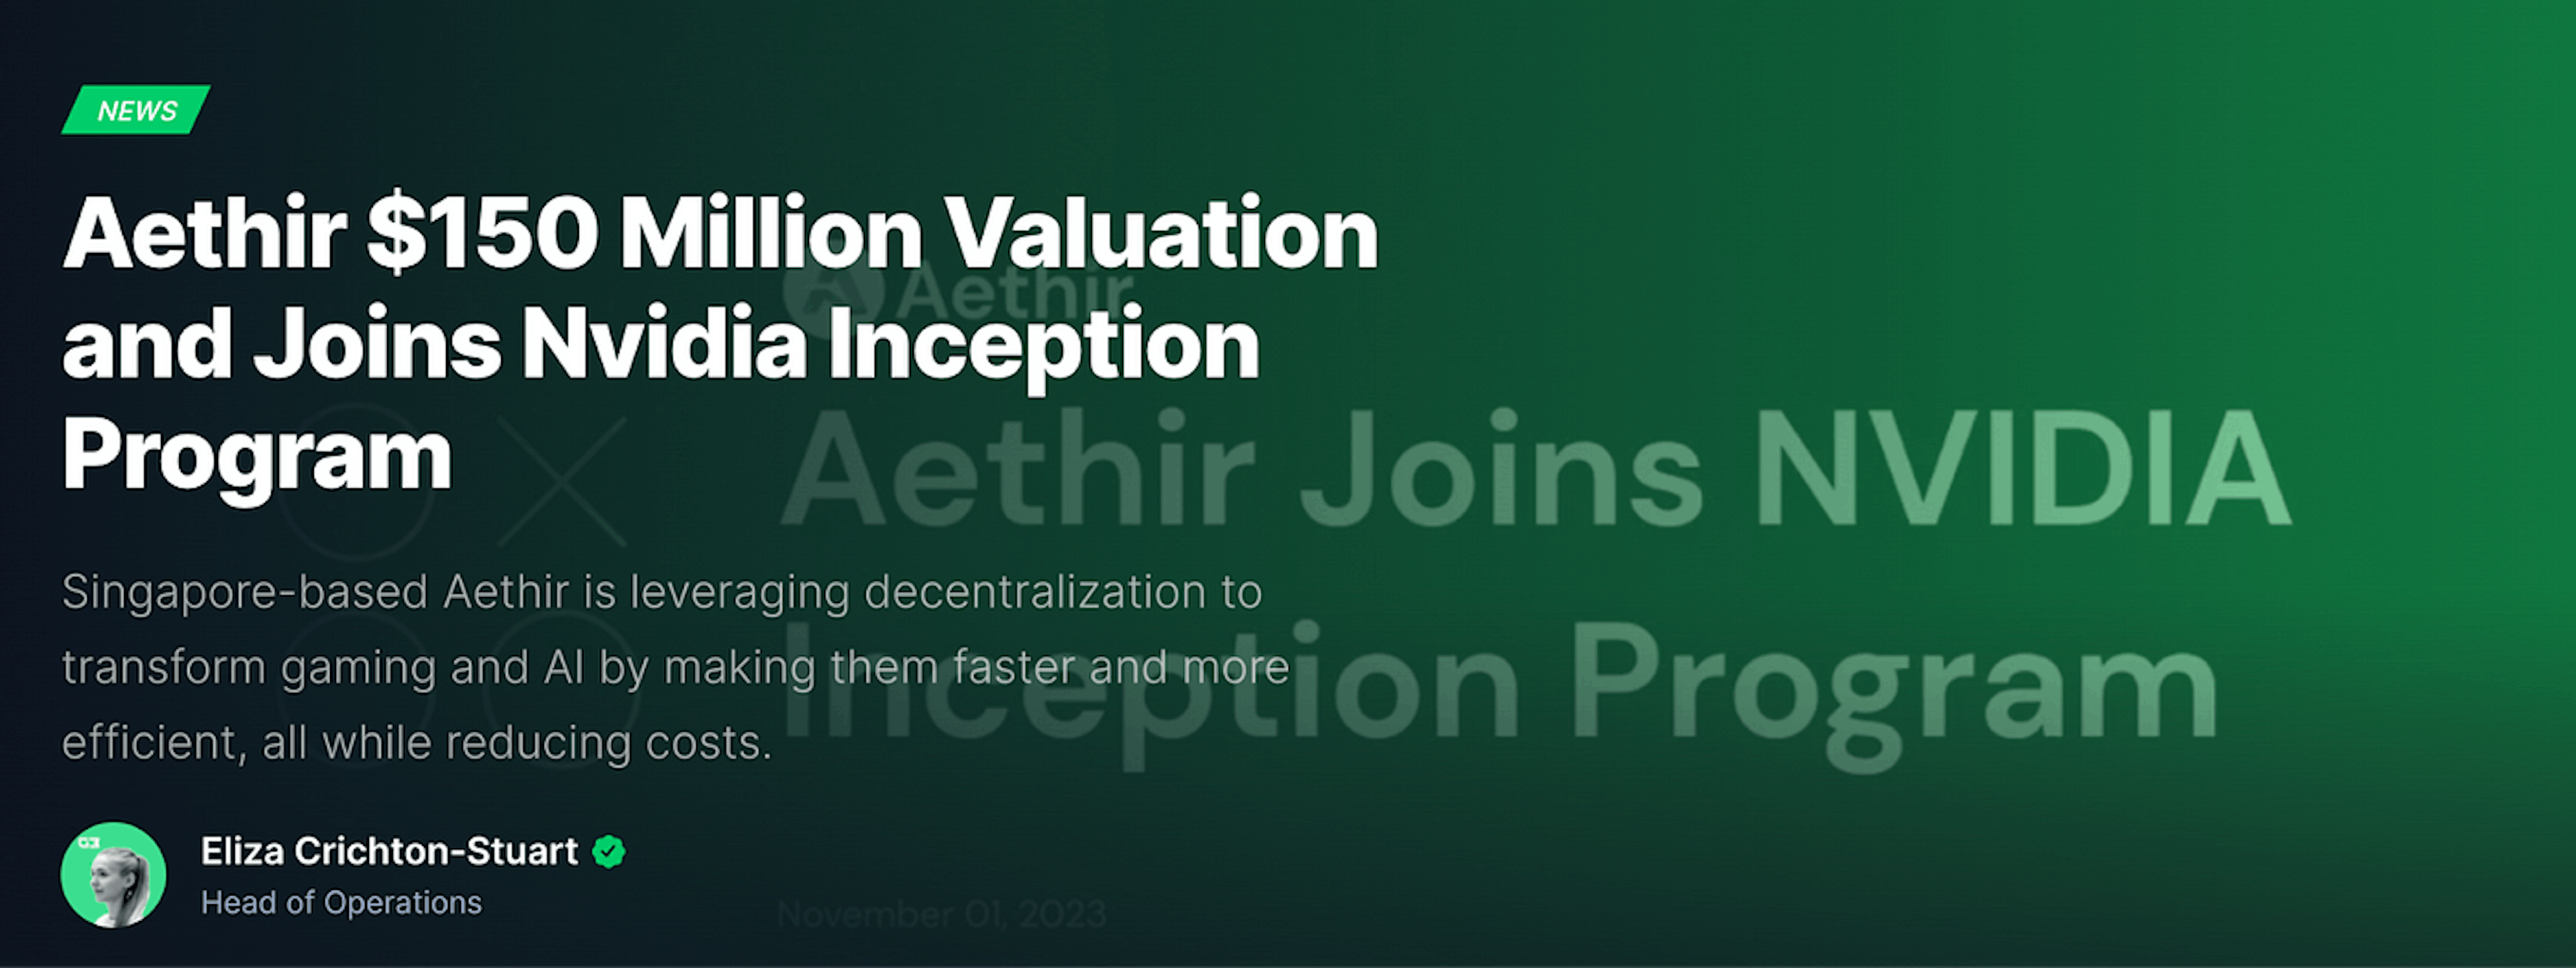 Aethir joined the Nvidia inception program 